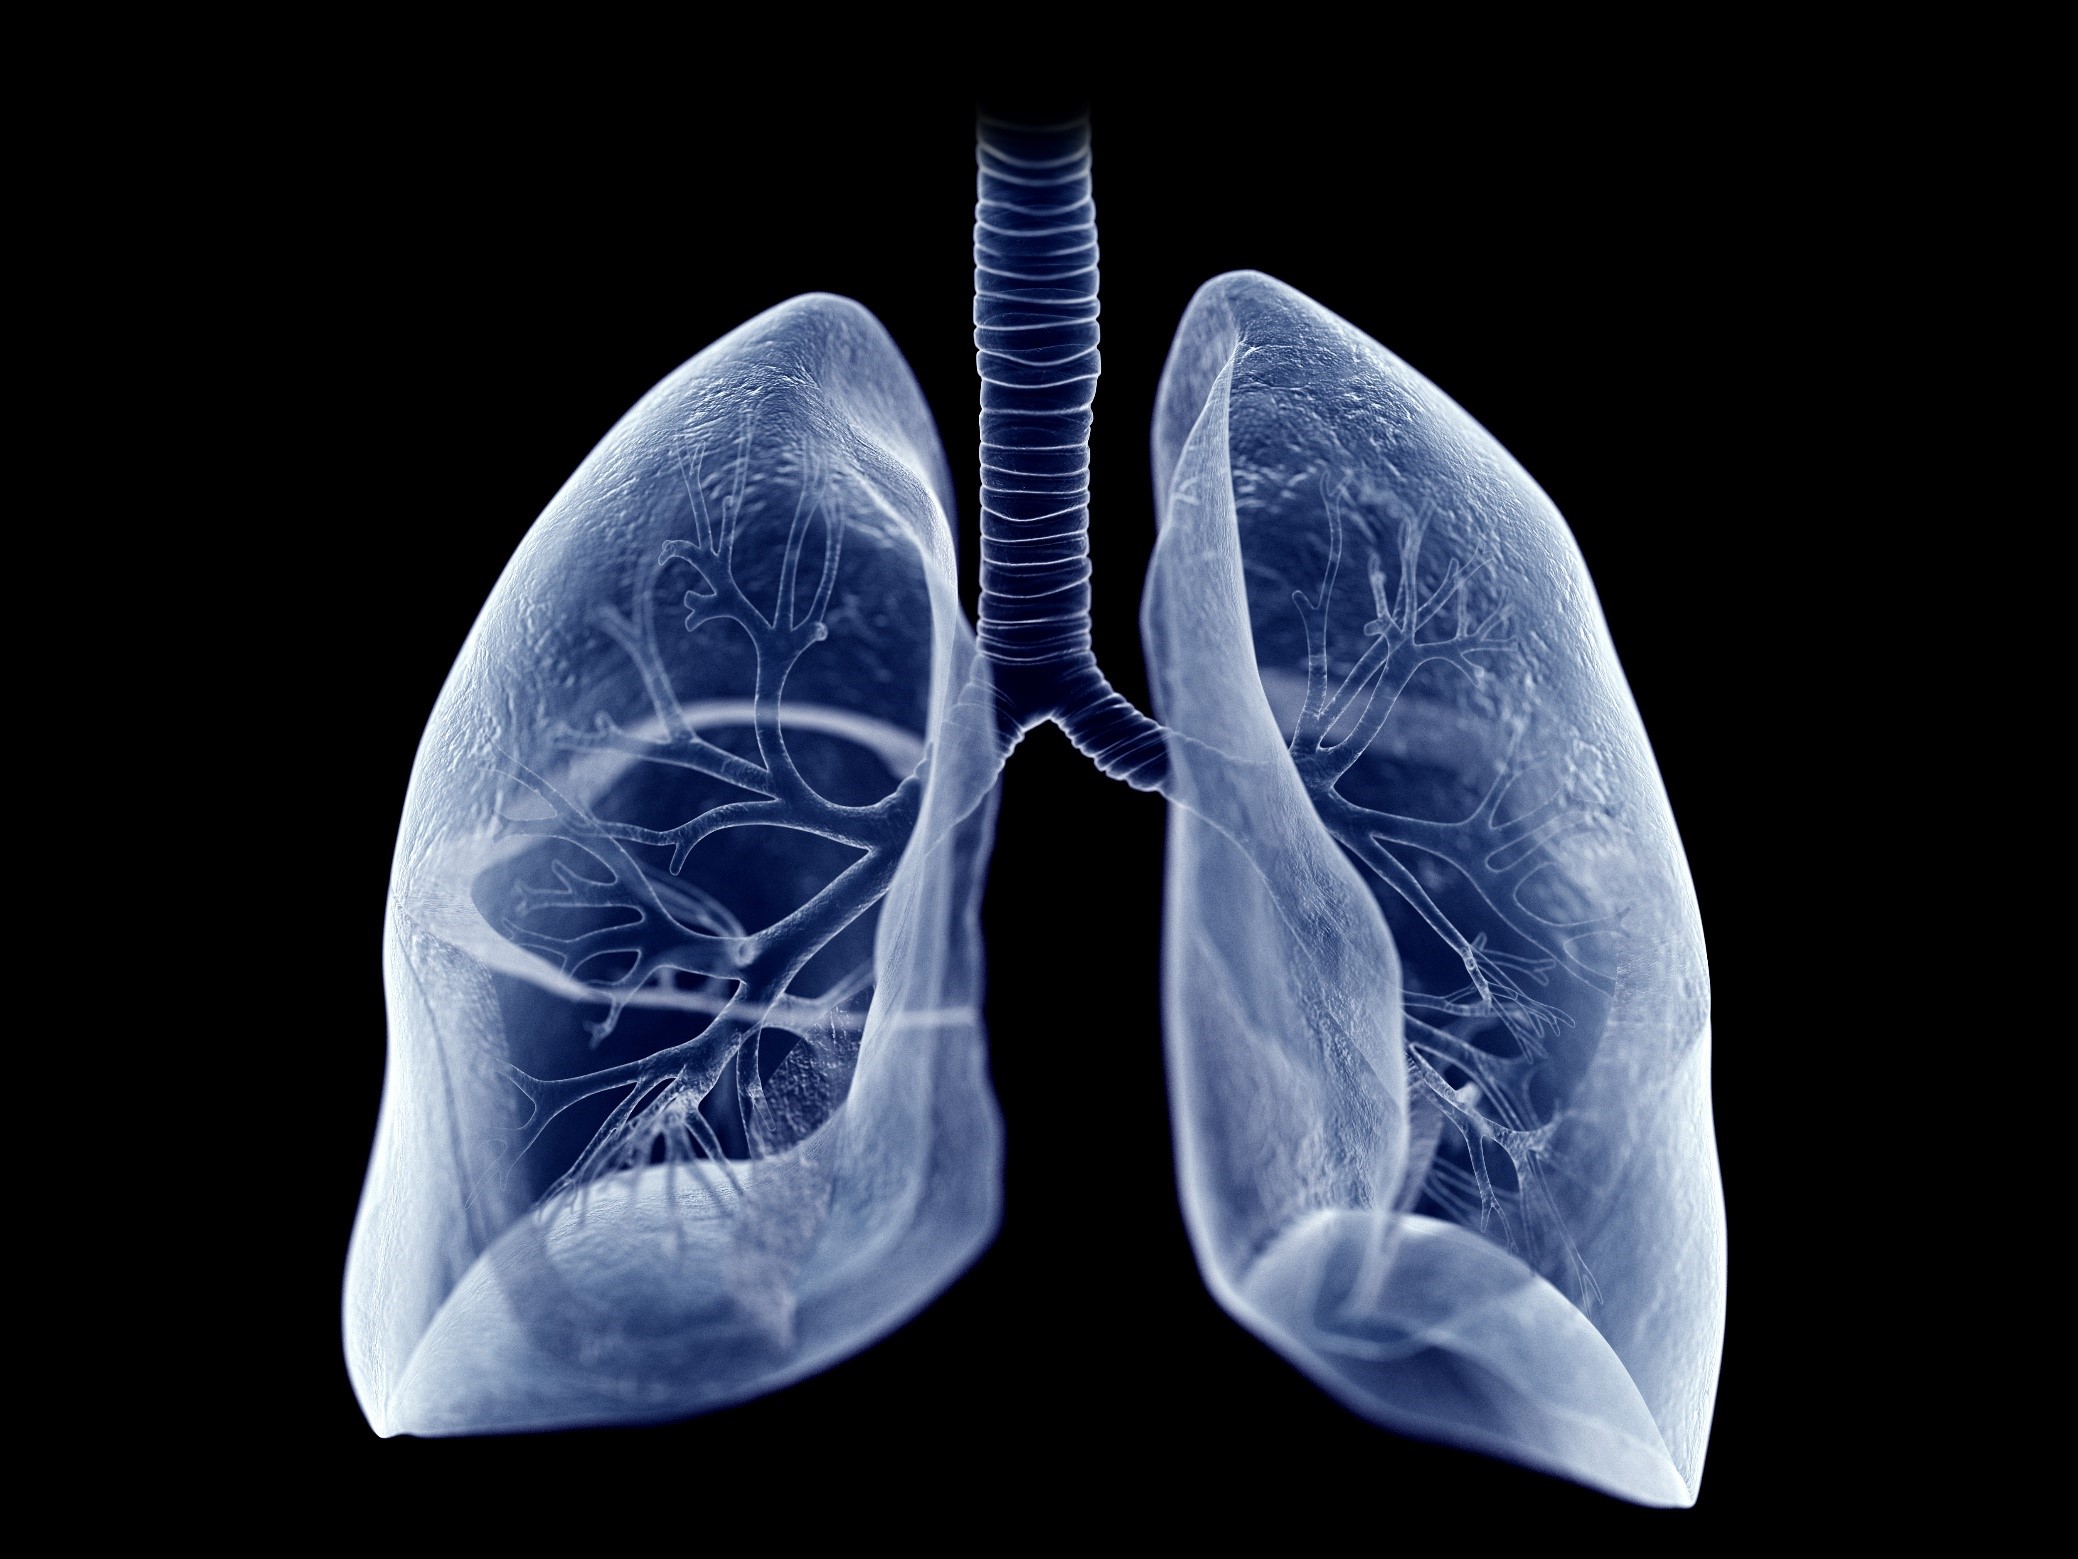 Highly Effective Memory B Cells Localized in the Lungs